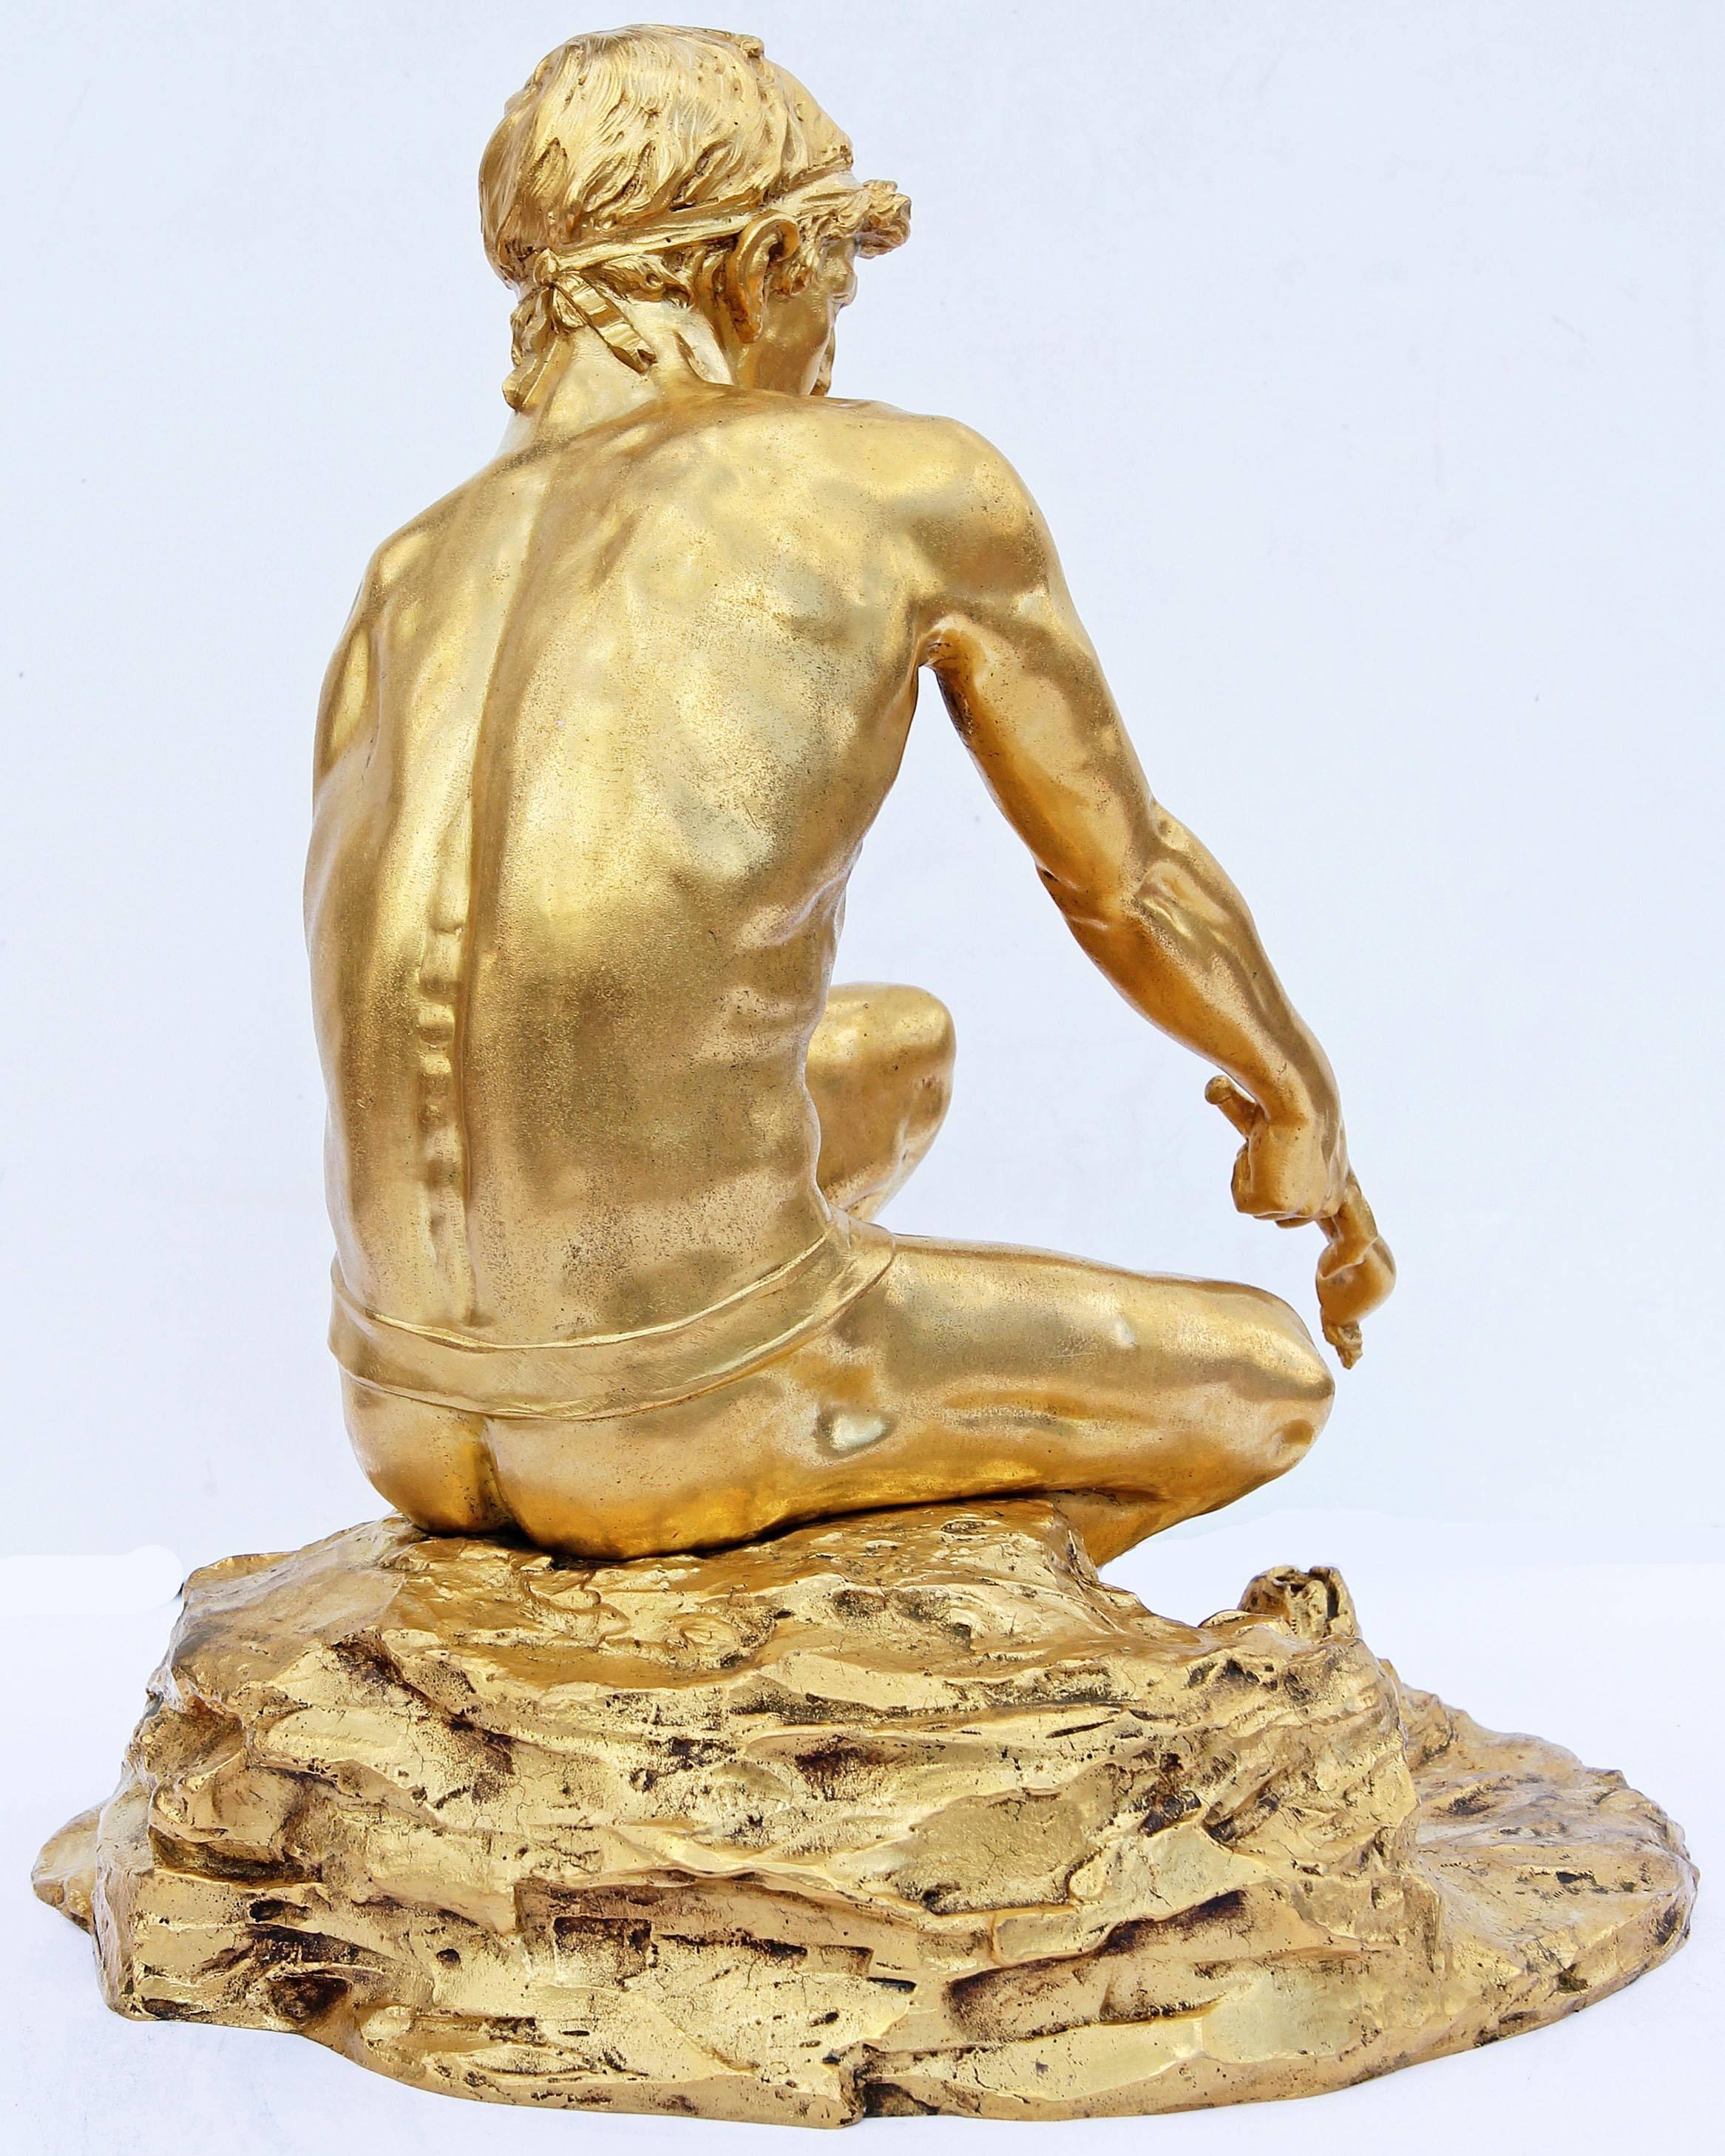 20th Century Neoclassical Revival Classical Male Nude Bronze Sculpture by E.F. Caldwell